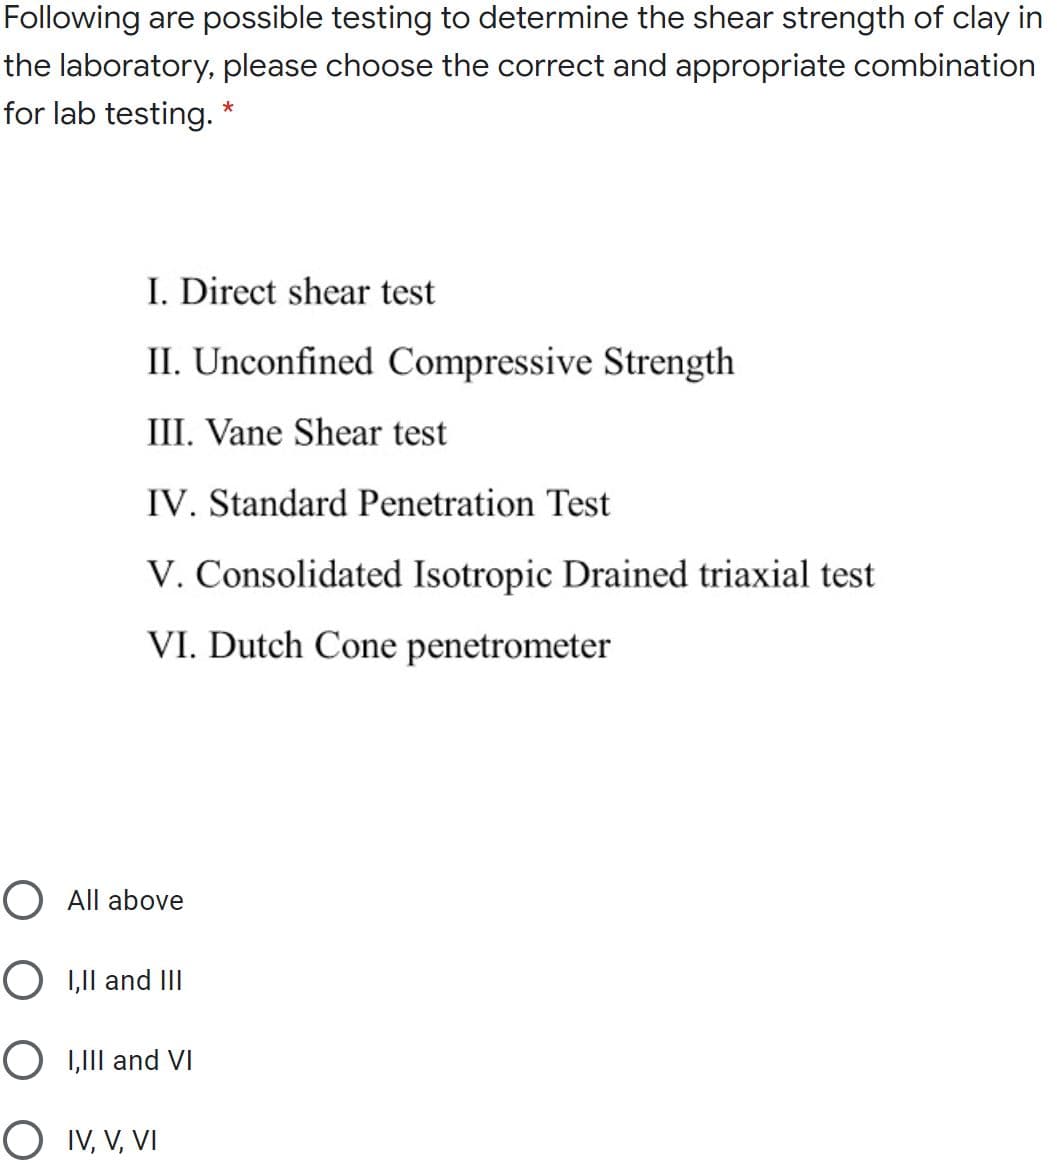 Following are possible testing to determine the shear strength of clay in
the laboratory, please choose the correct and appropriate combination
for lab testing. *
I. Direct shear test
II. Unconfined Compressive Strength
III. Vane Shear test
IV. Standard Penetration Test
V. Consolidated Isotropic Drained triaxial test
VI. Dutch Cone penetrometer
O All above
O 1,1l and III
O I,II and VI
O IV, V, VI
